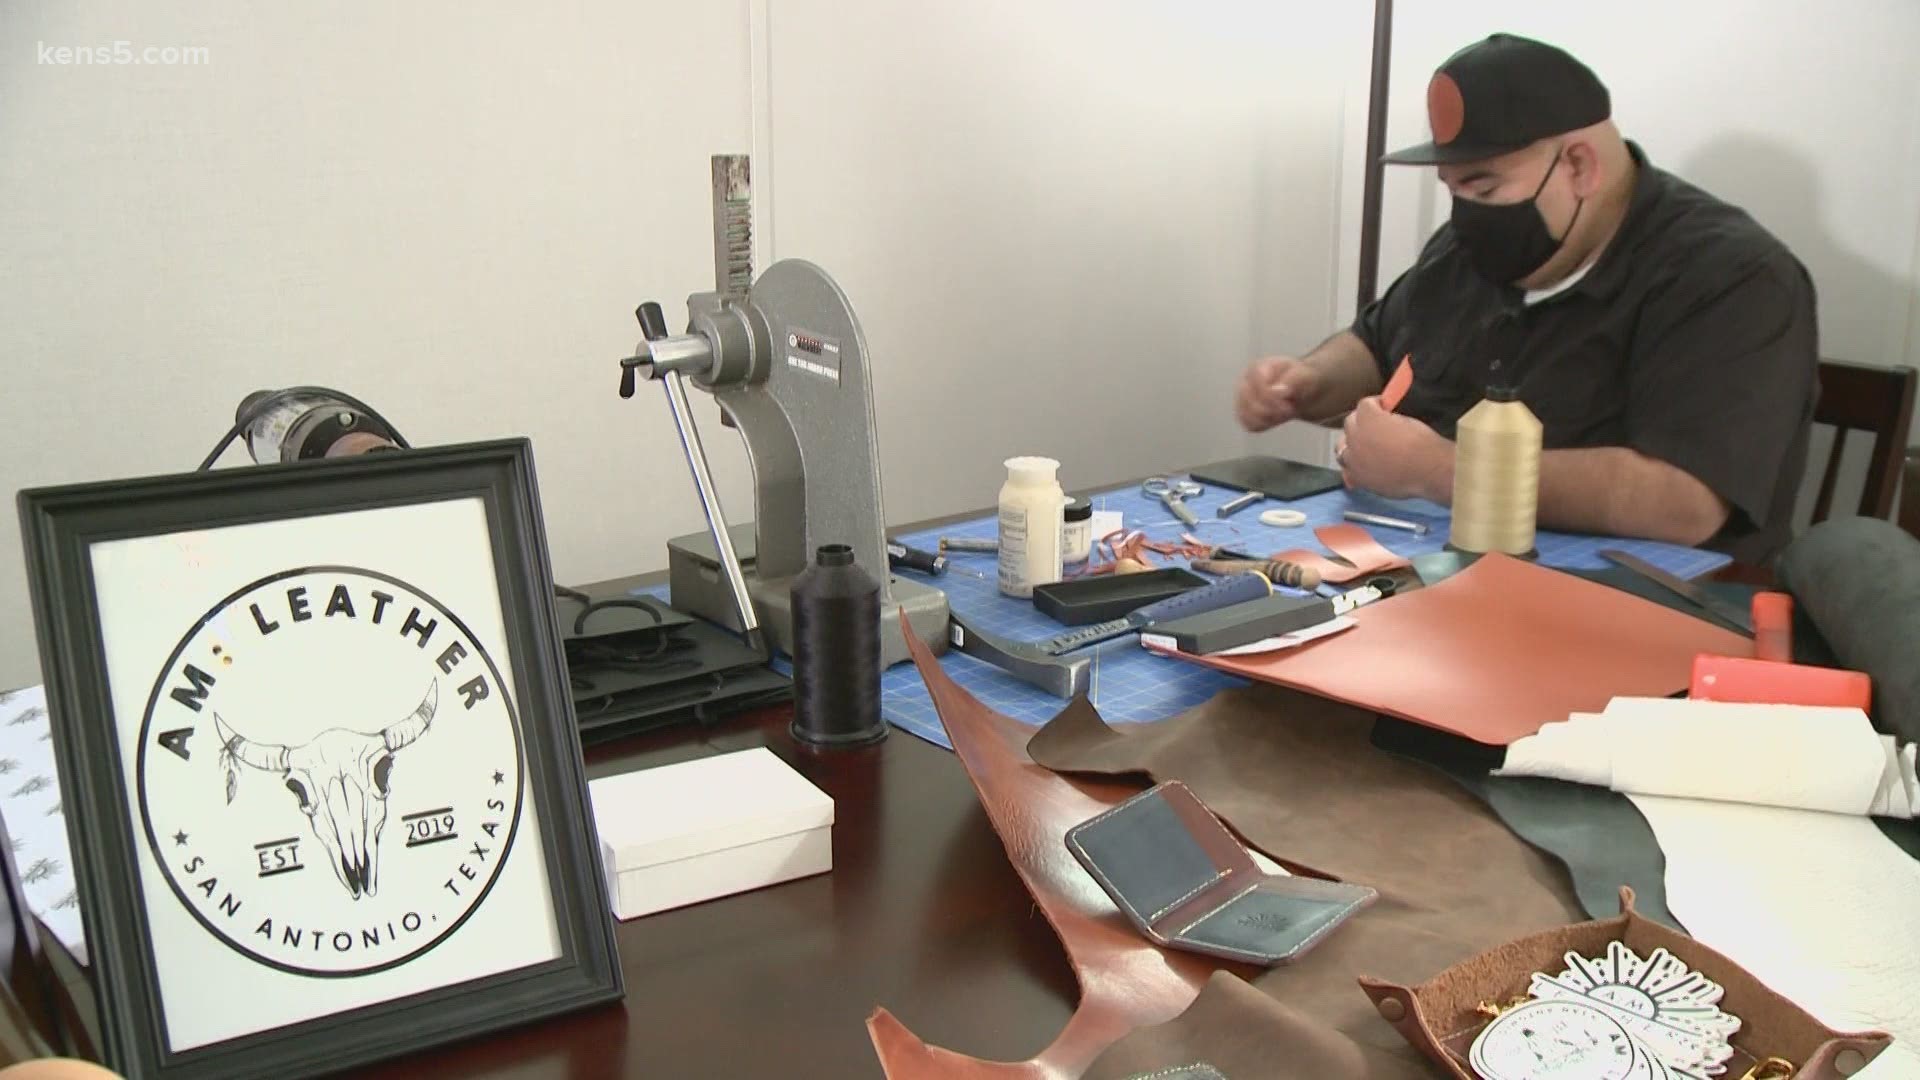 This husband, father and now business owner discovered ways to let out his inner creativity with leather.